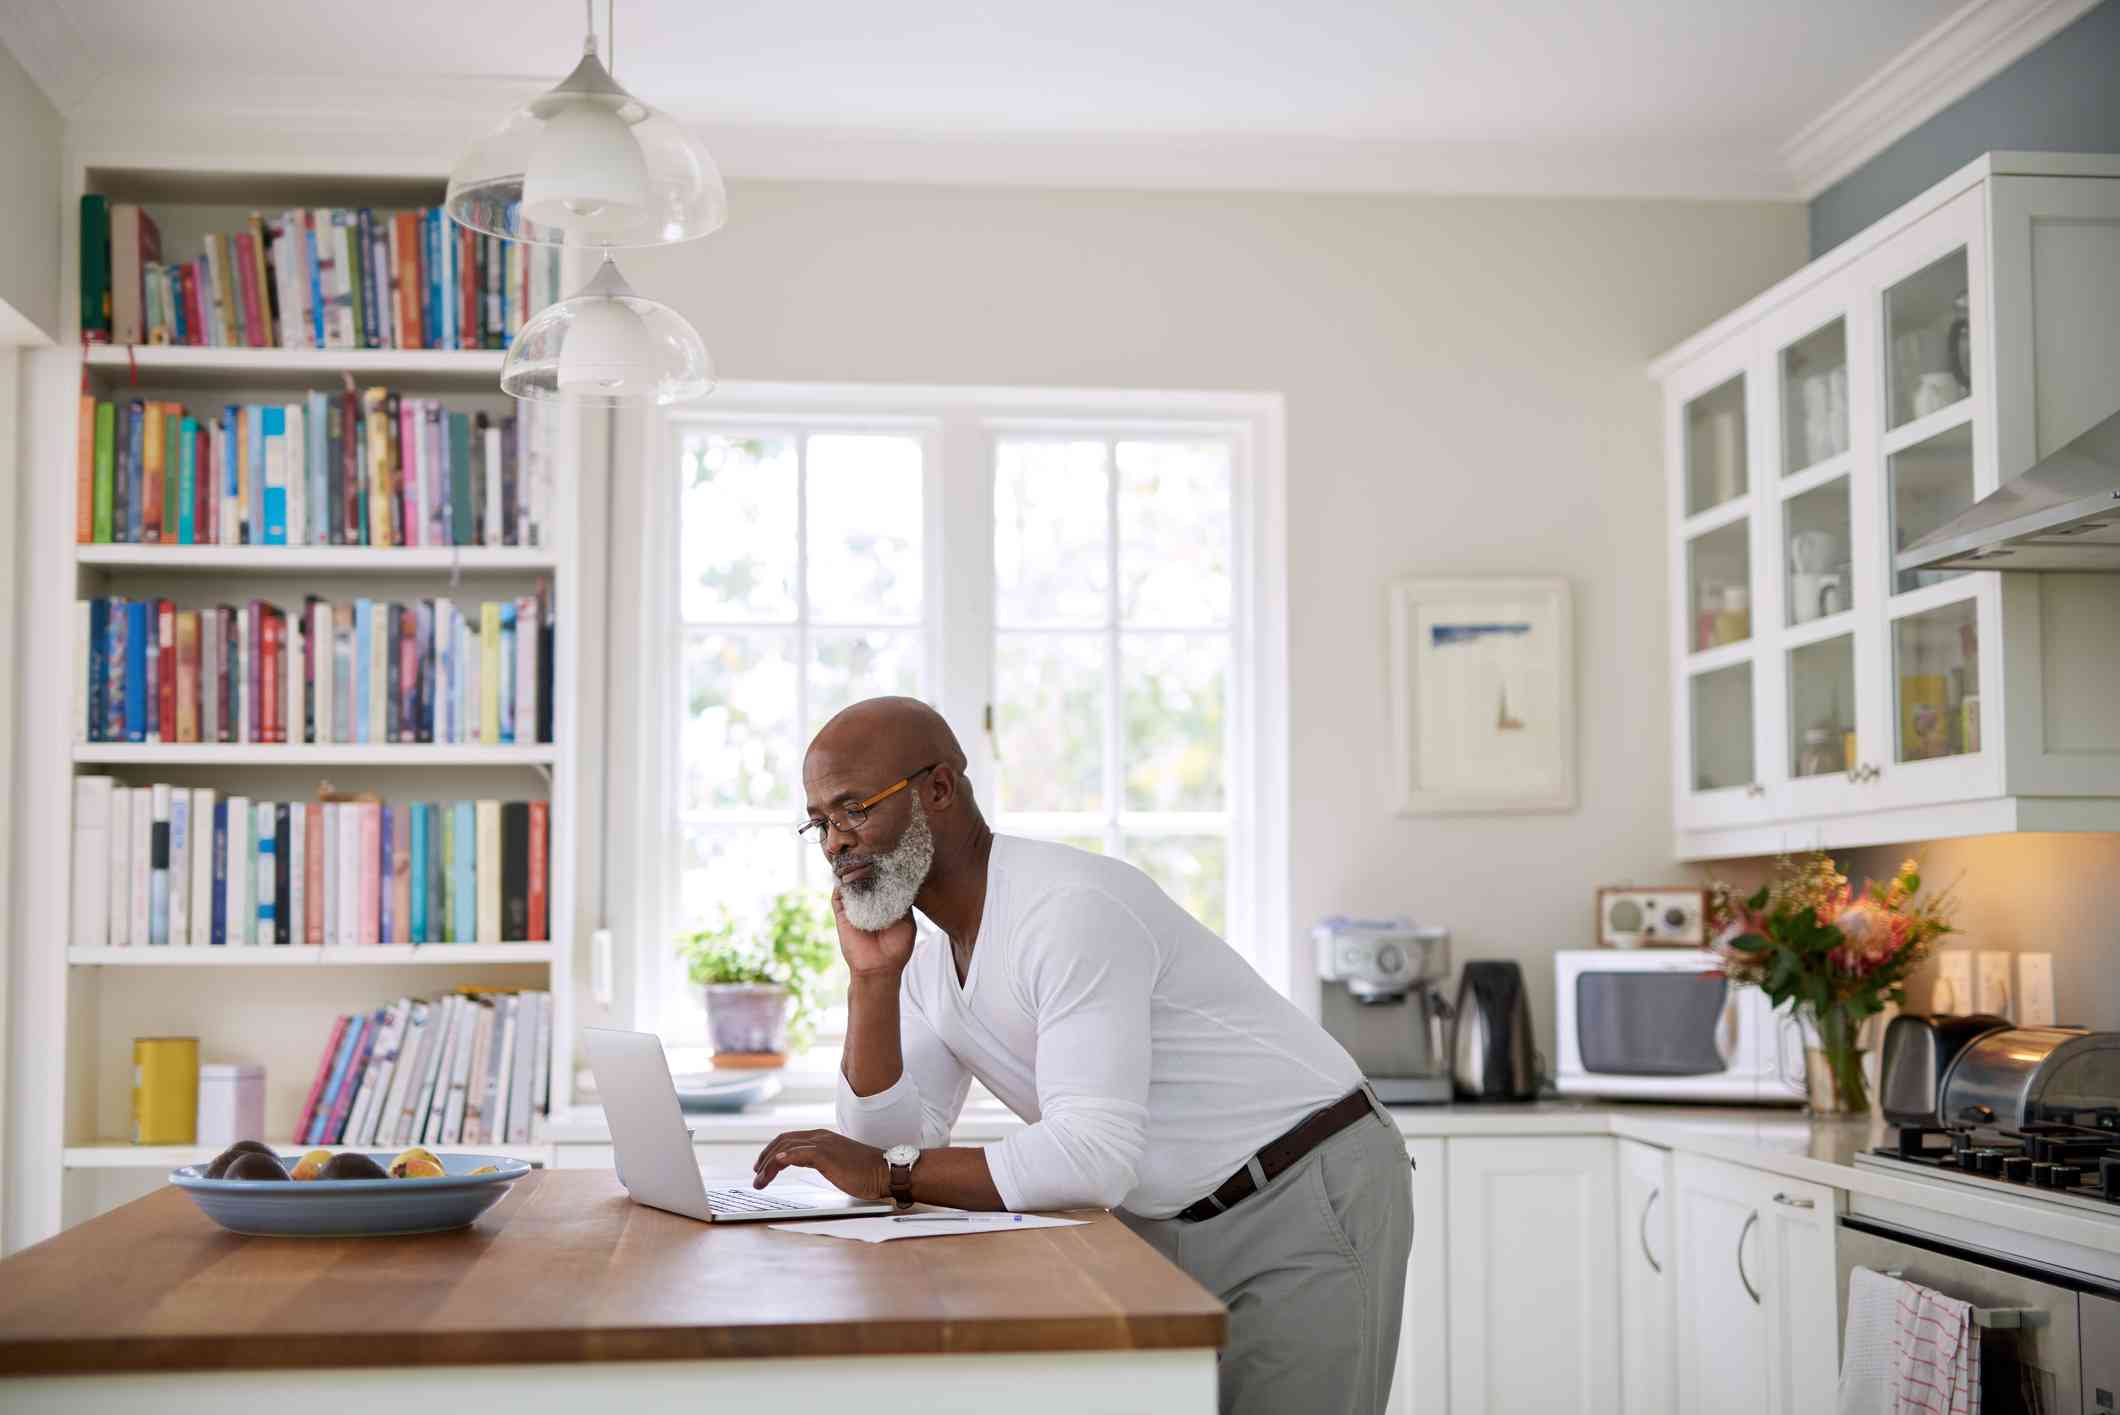 A male mental health professional leans over his kitchen counter to look closely at the laptop that is open infront of him with a serious expression.